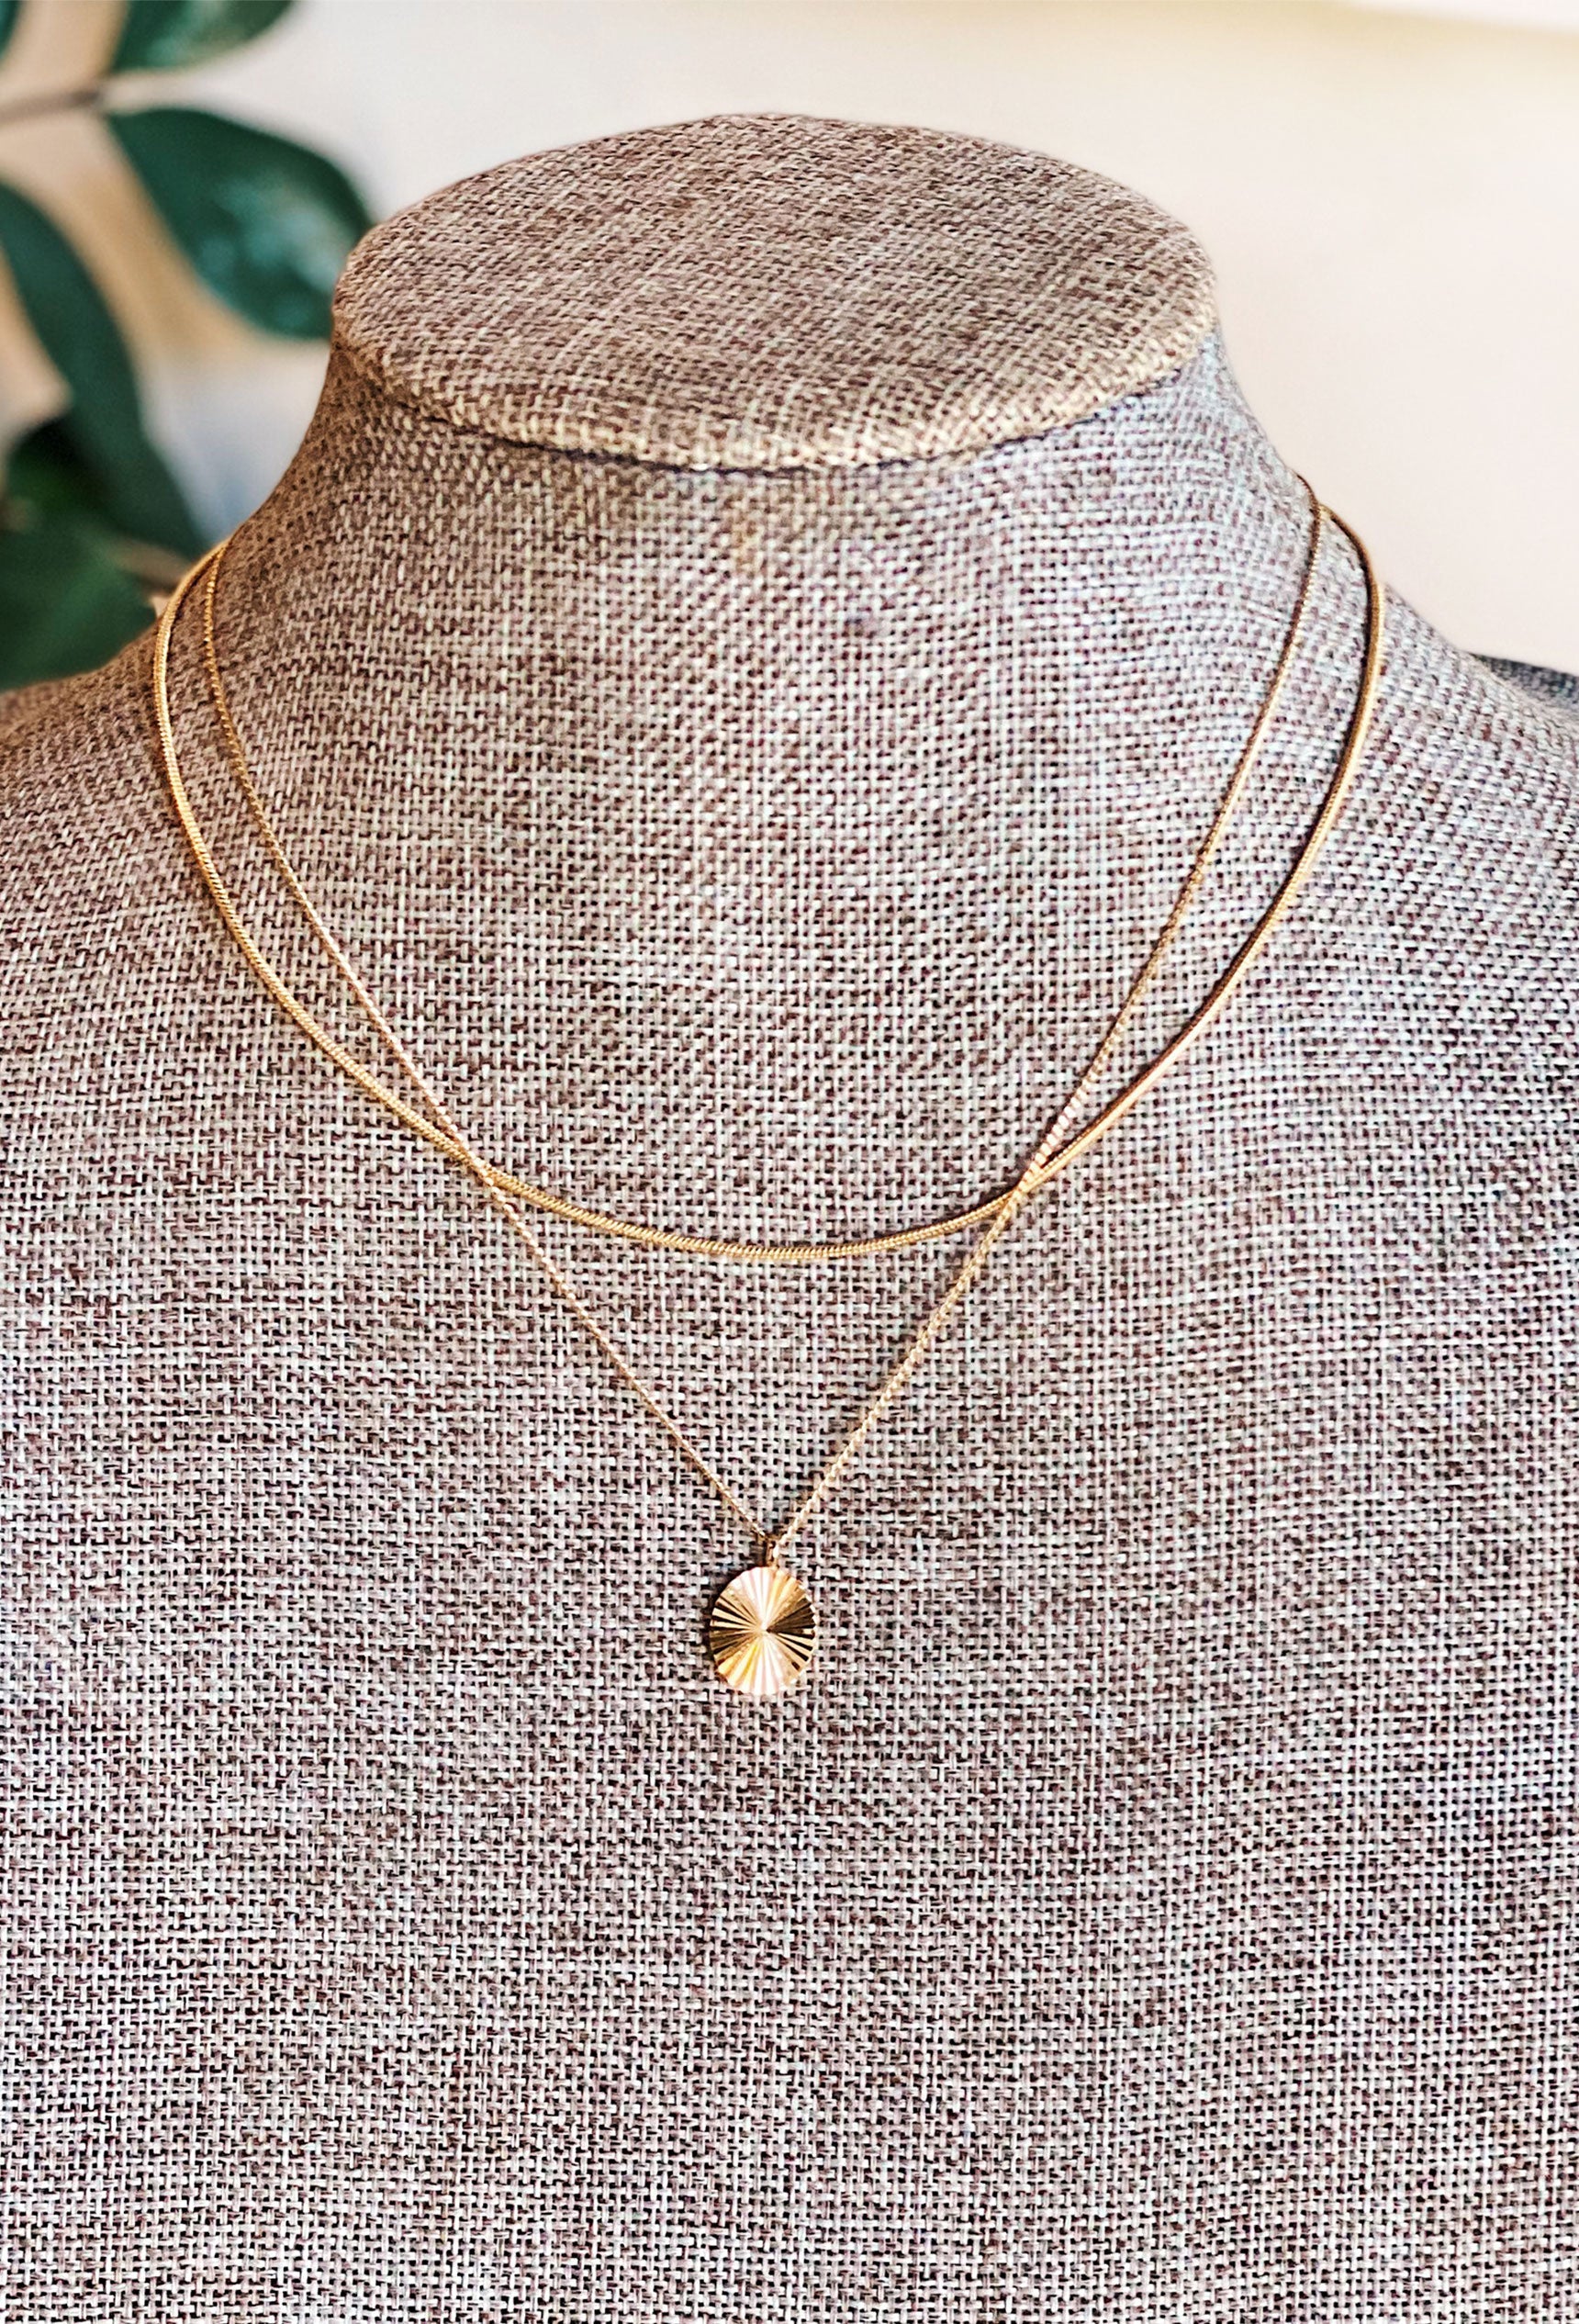 Columbus Textured Oval Necklace, gold dipped layered necklace with textured oval charm